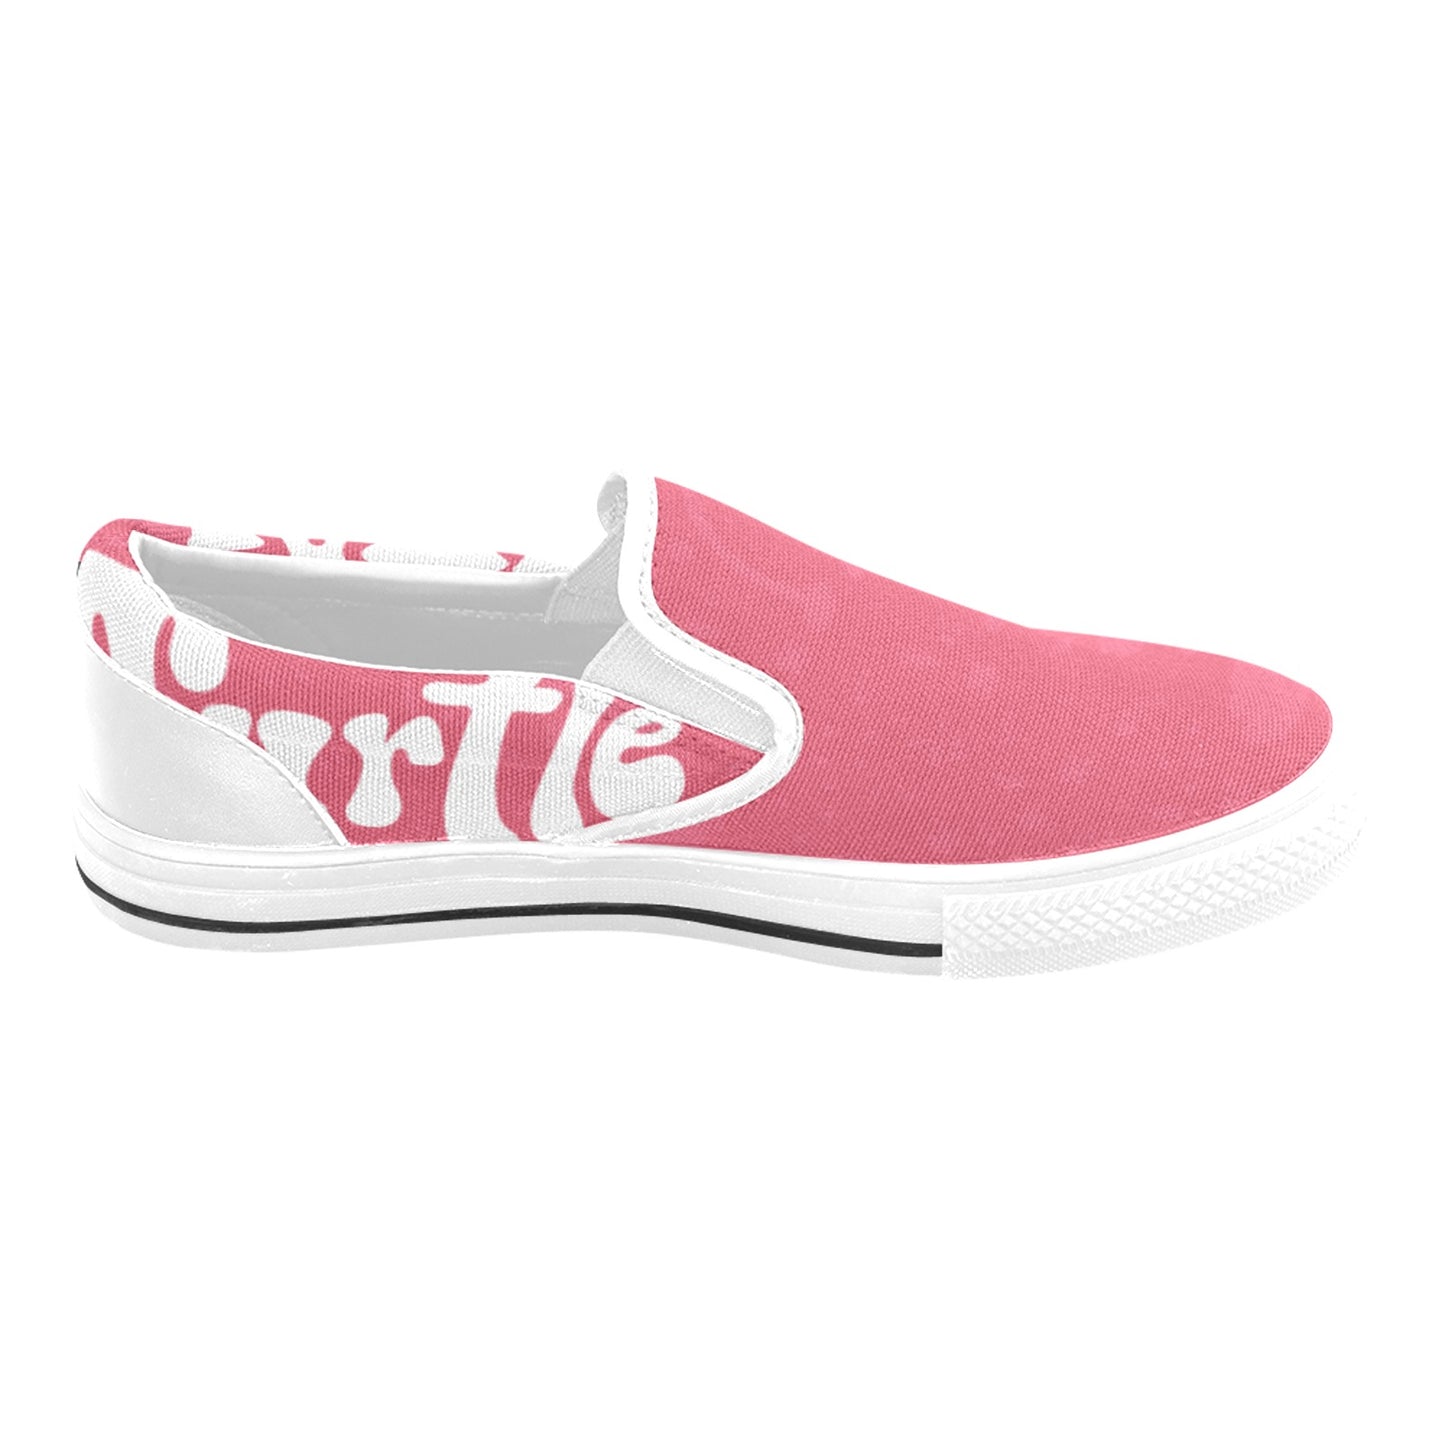 Kid's Slip-On Canvas Shoe "Powerful in Pink" w/ Subdue pattern